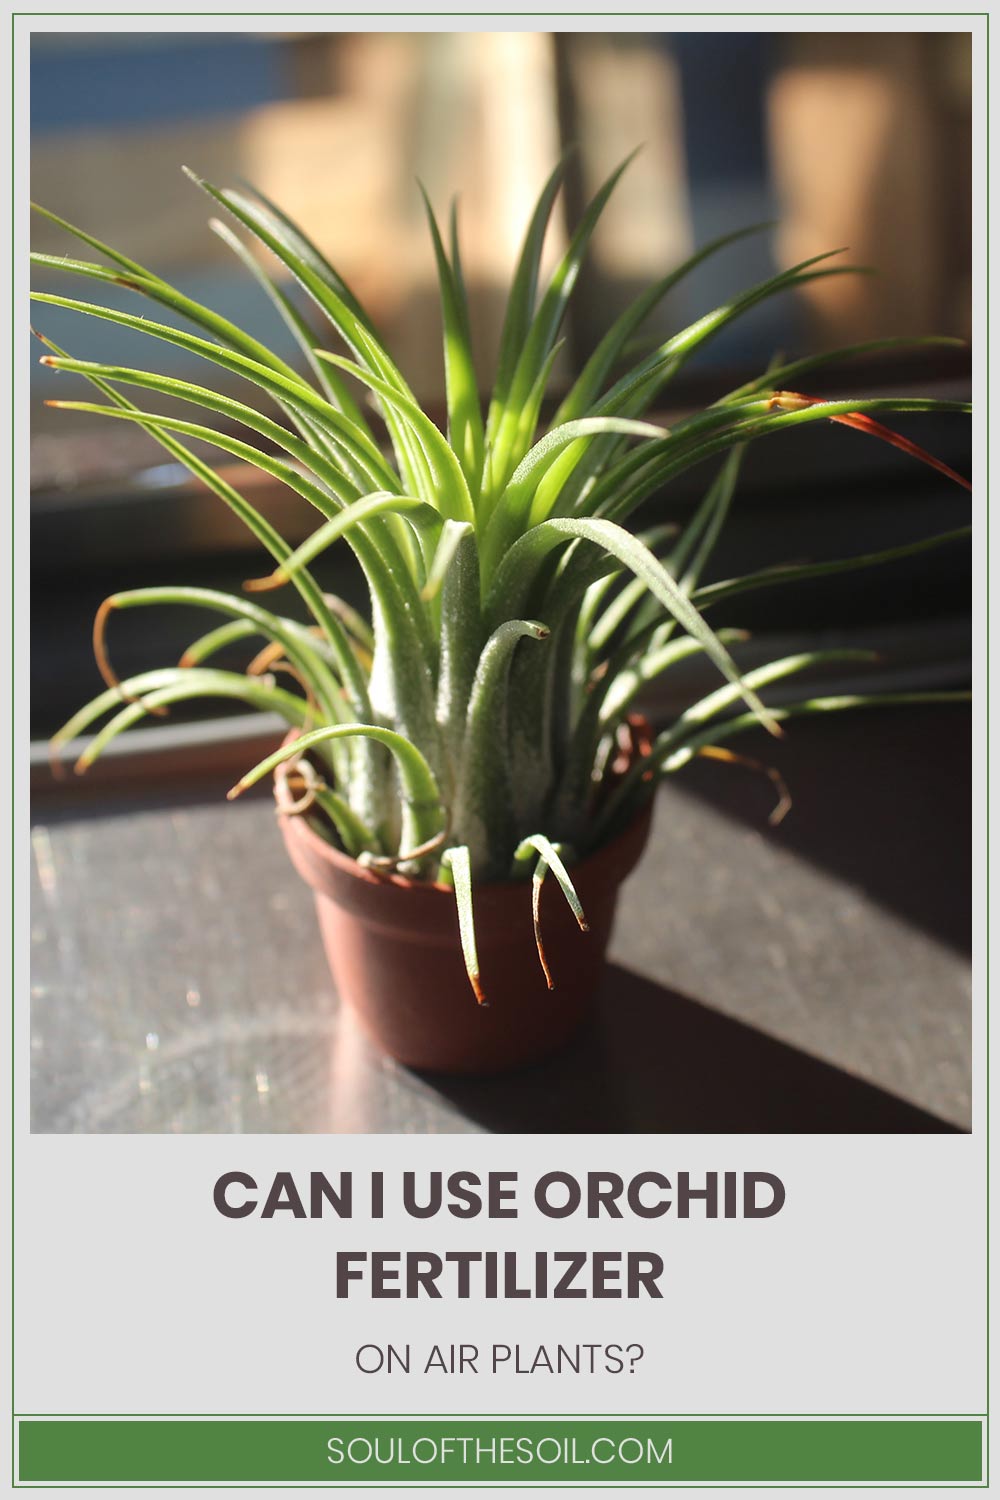 Can I Use Orchid Fertilizer On Air Plants?